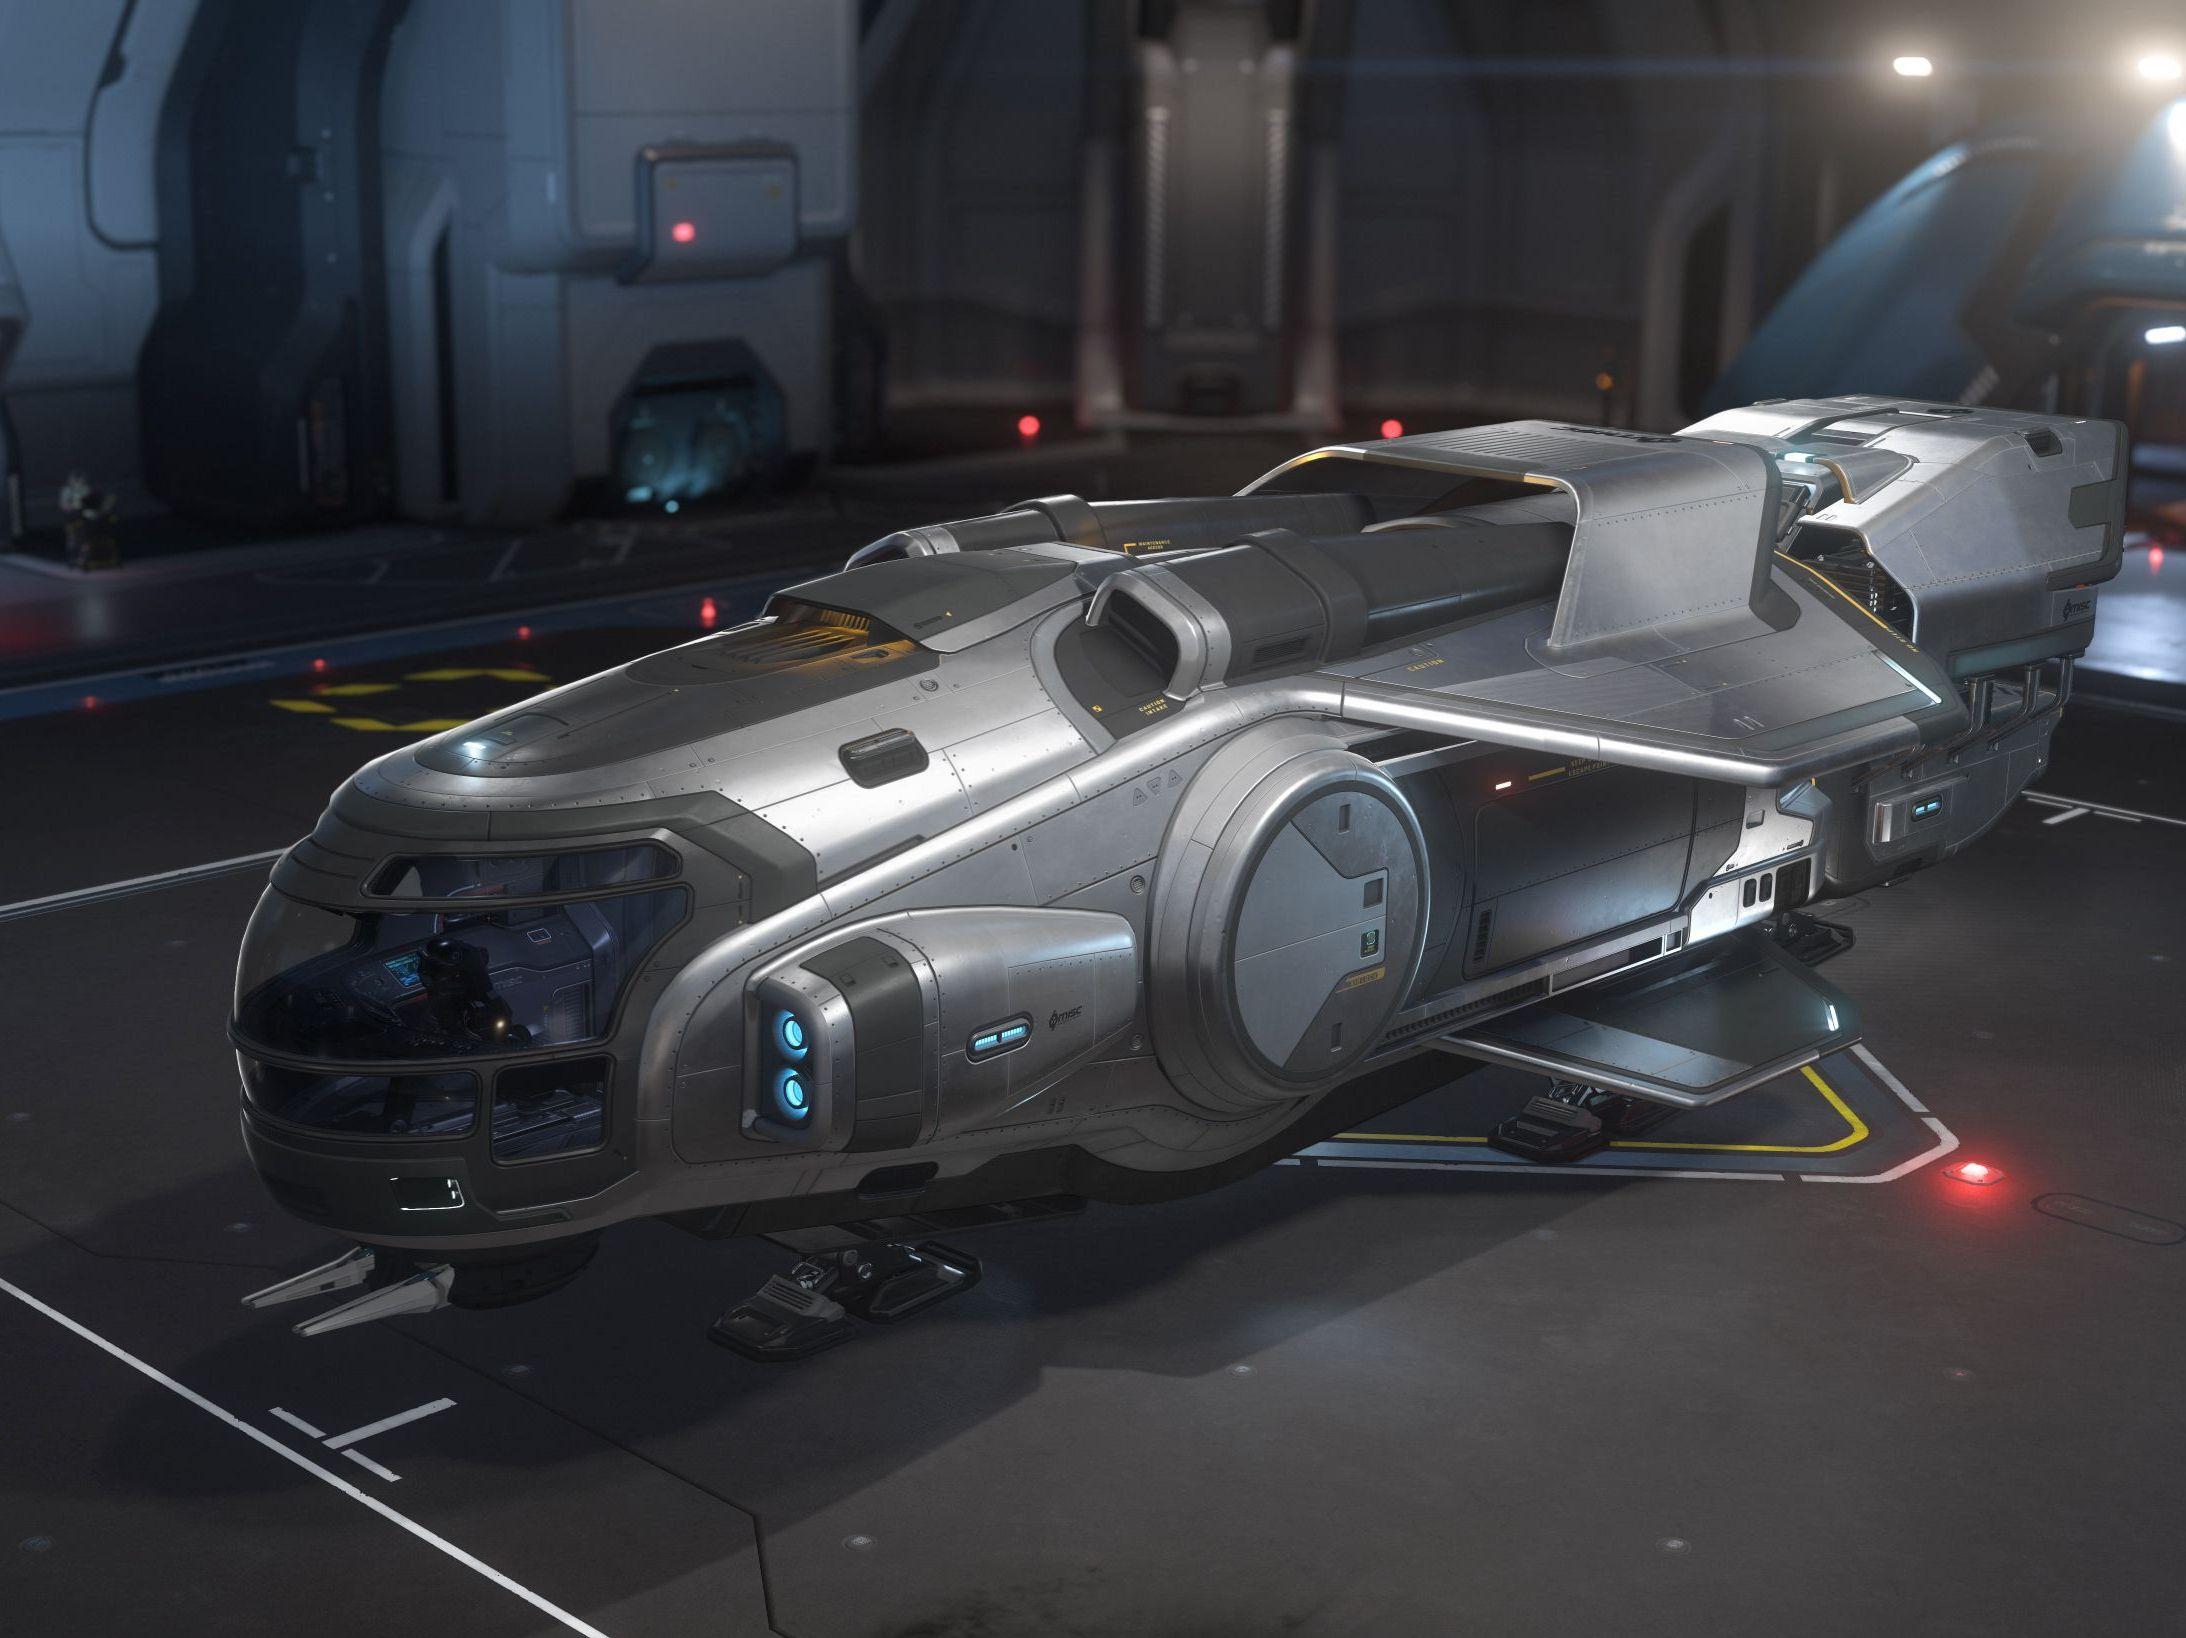 Introducing the MISC Odyssey - Roberts Space Industries  Follow the  development of Star Citizen and Squadron 42